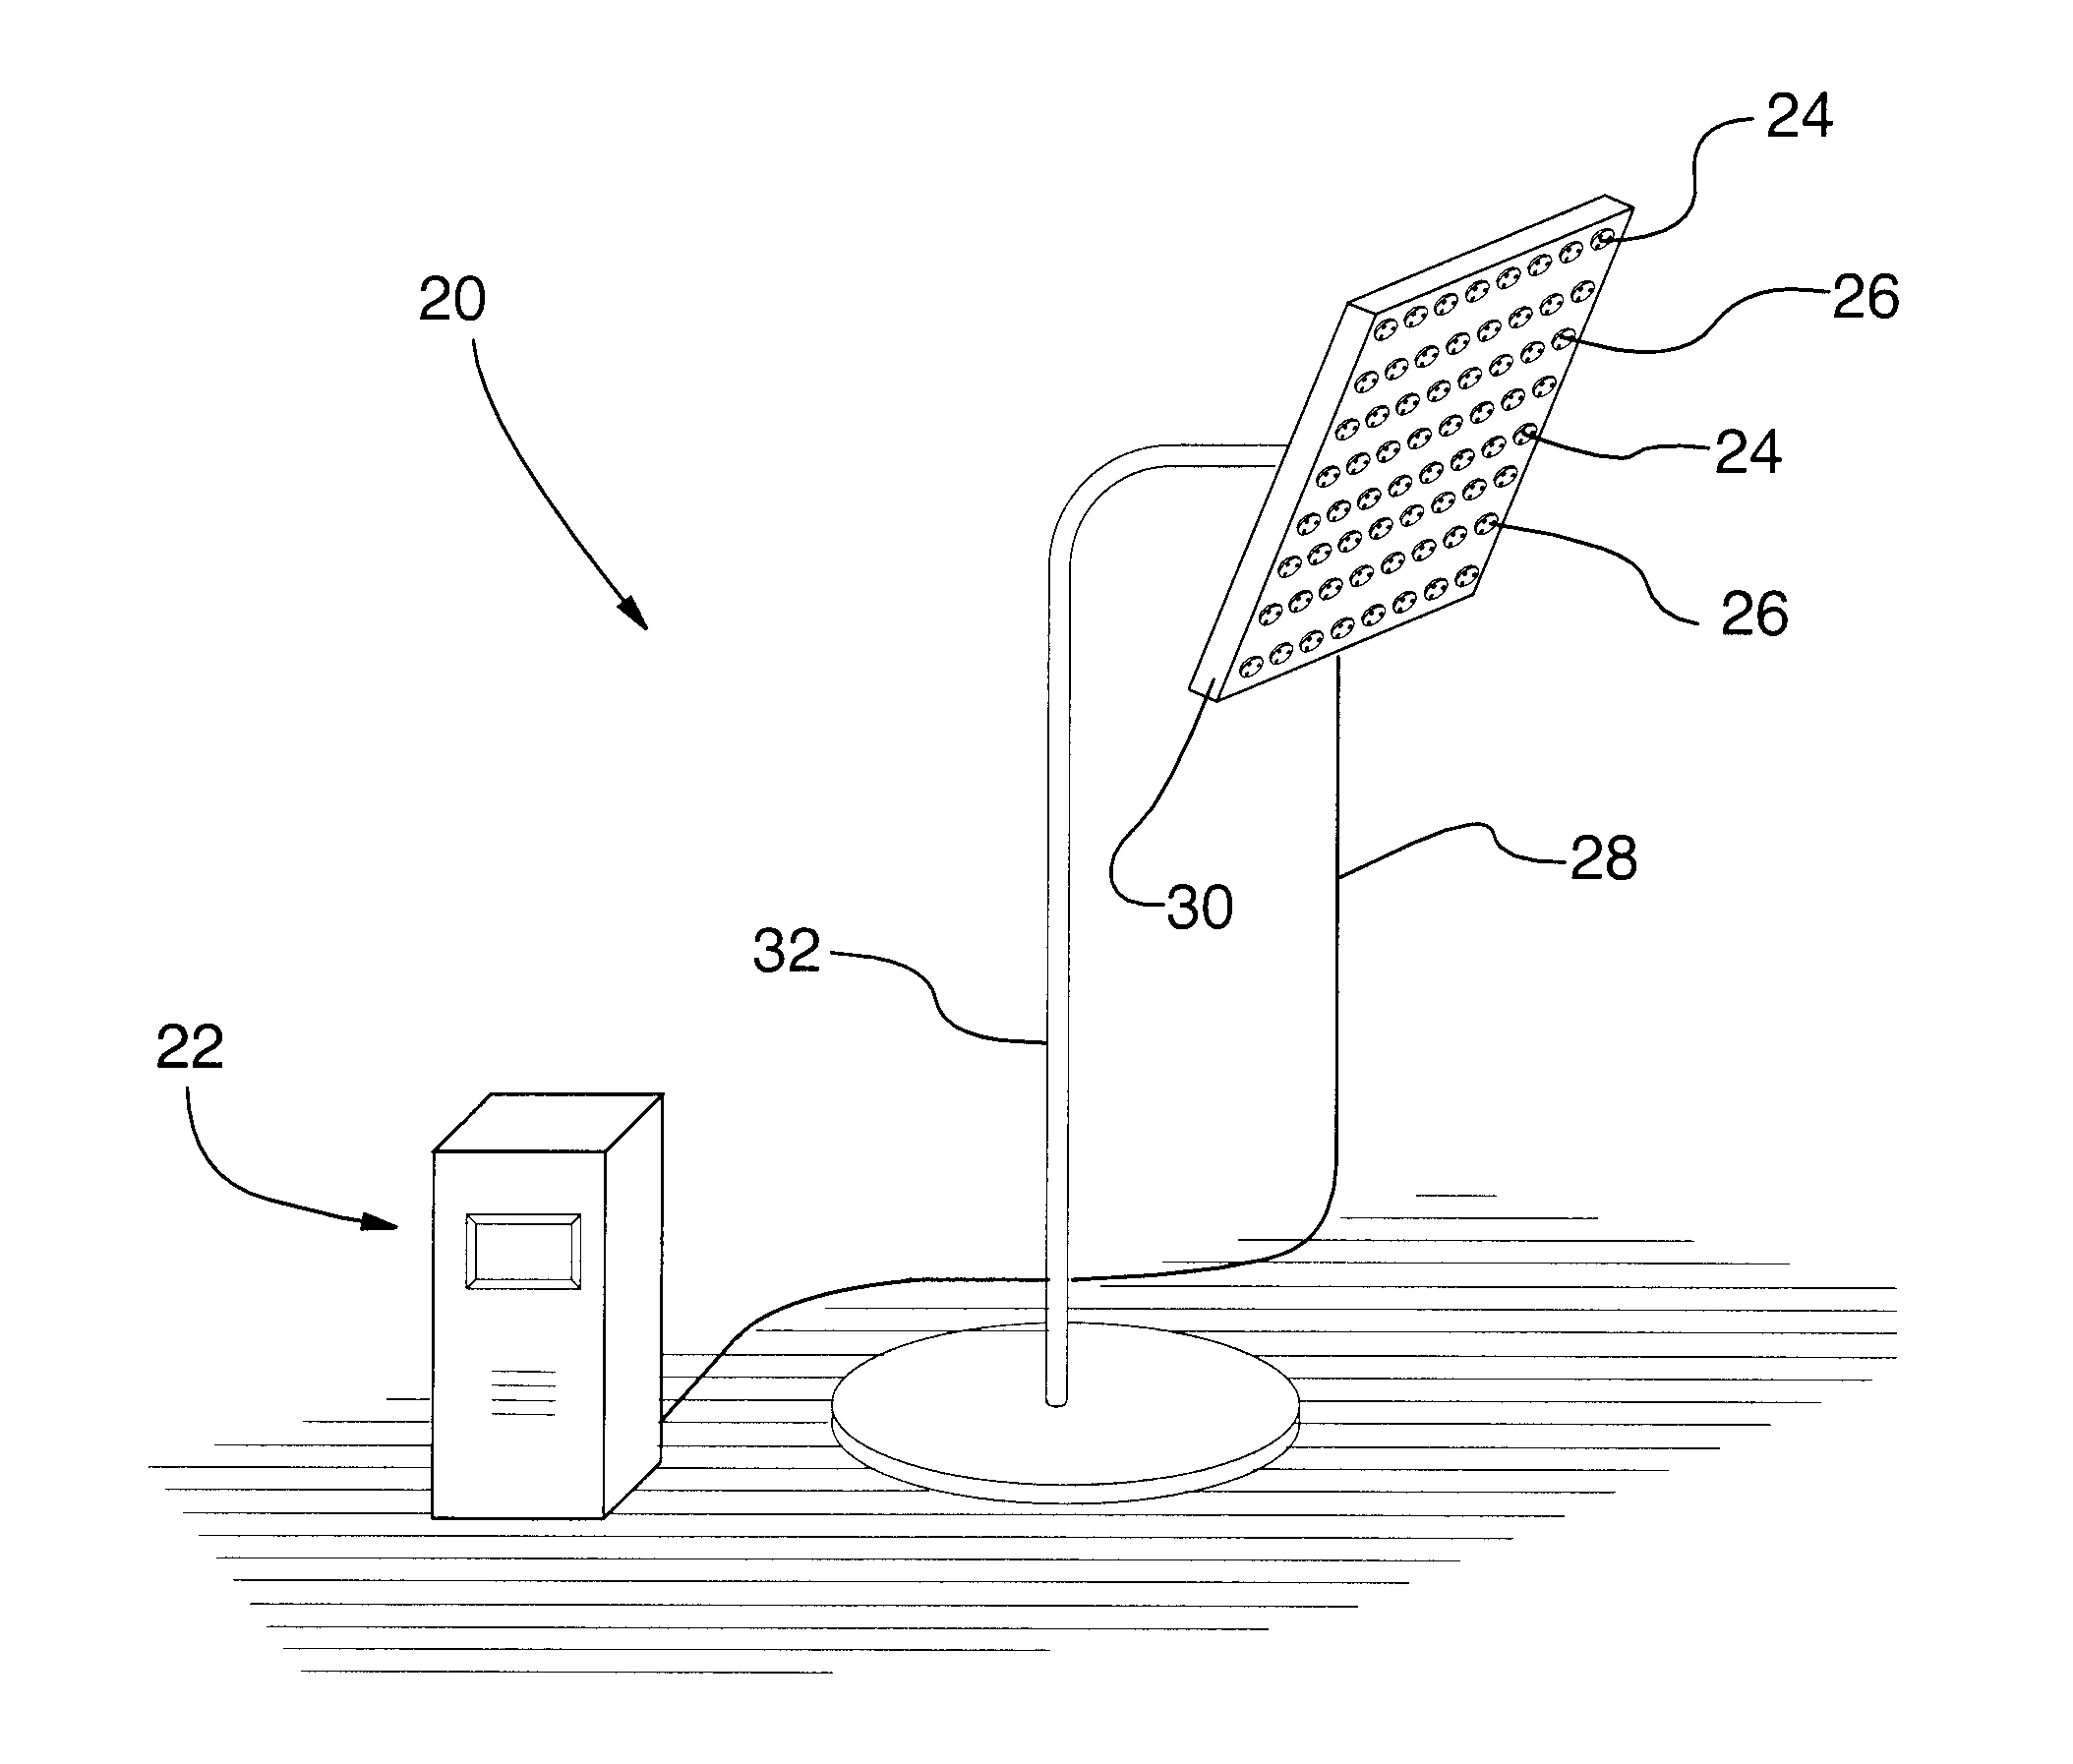 Artificial light apparatus and its use for influencing a condition in a subject